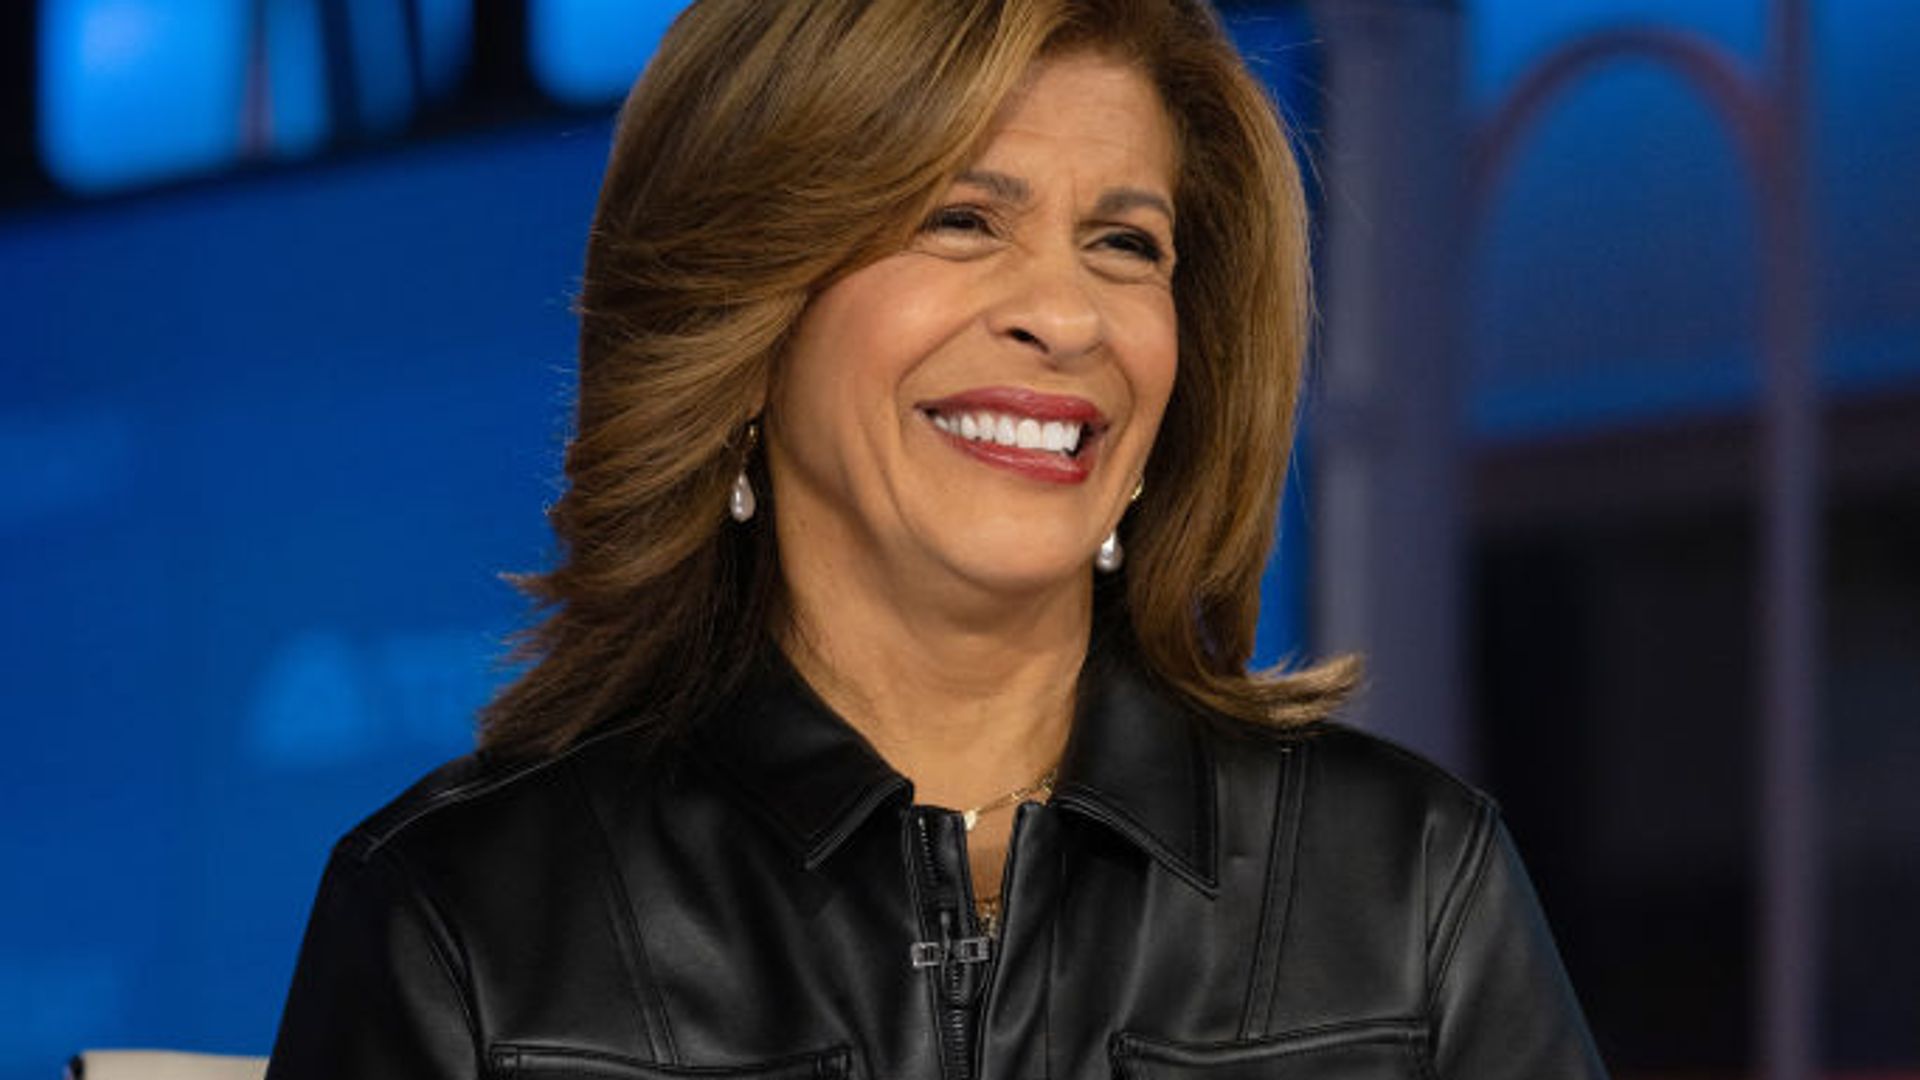 Hoda is a much-loved host on Today